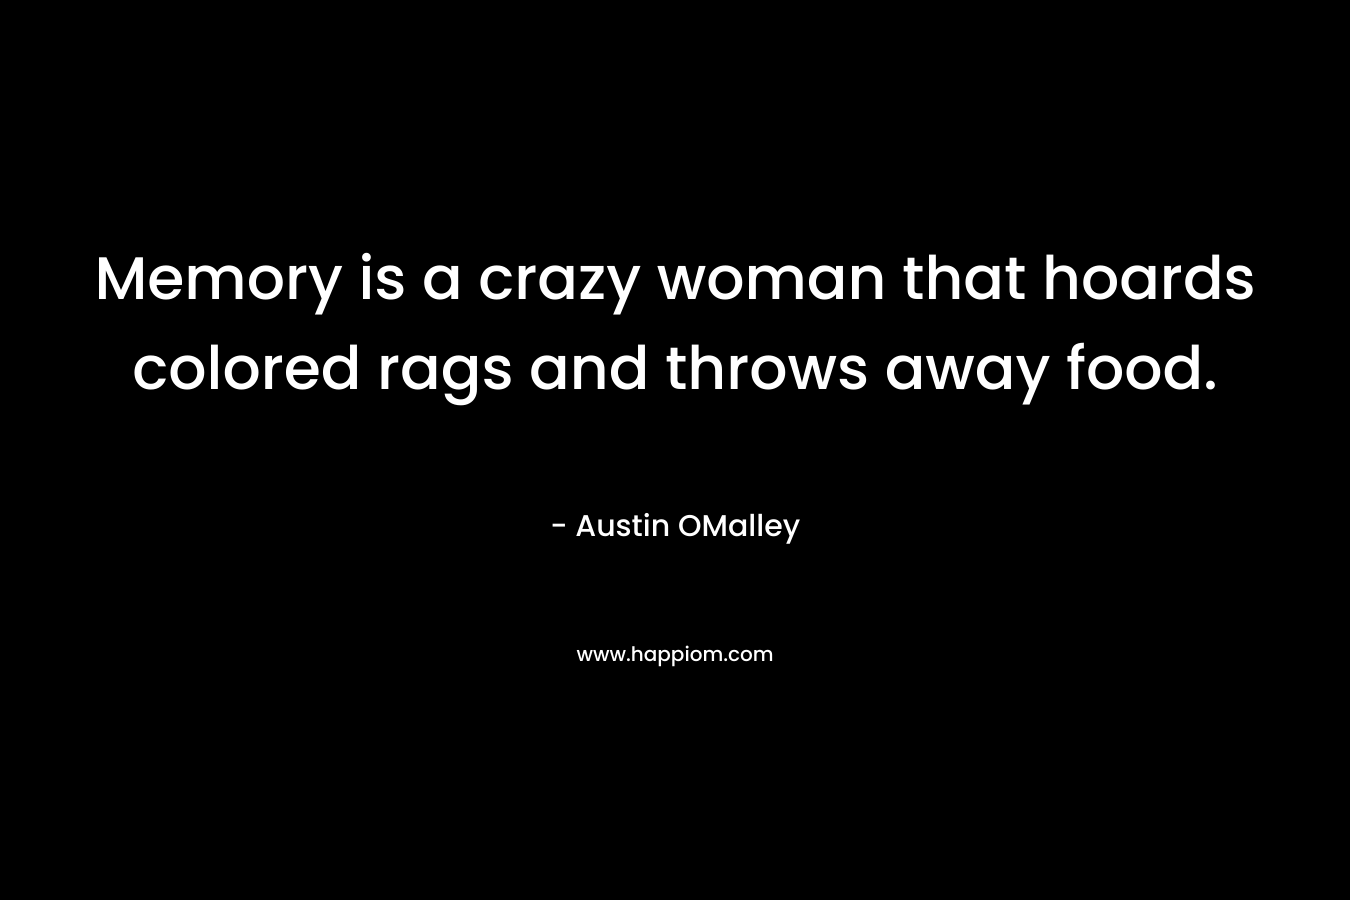 Memory is a crazy woman that hoards colored rags and throws away food. – Austin OMalley